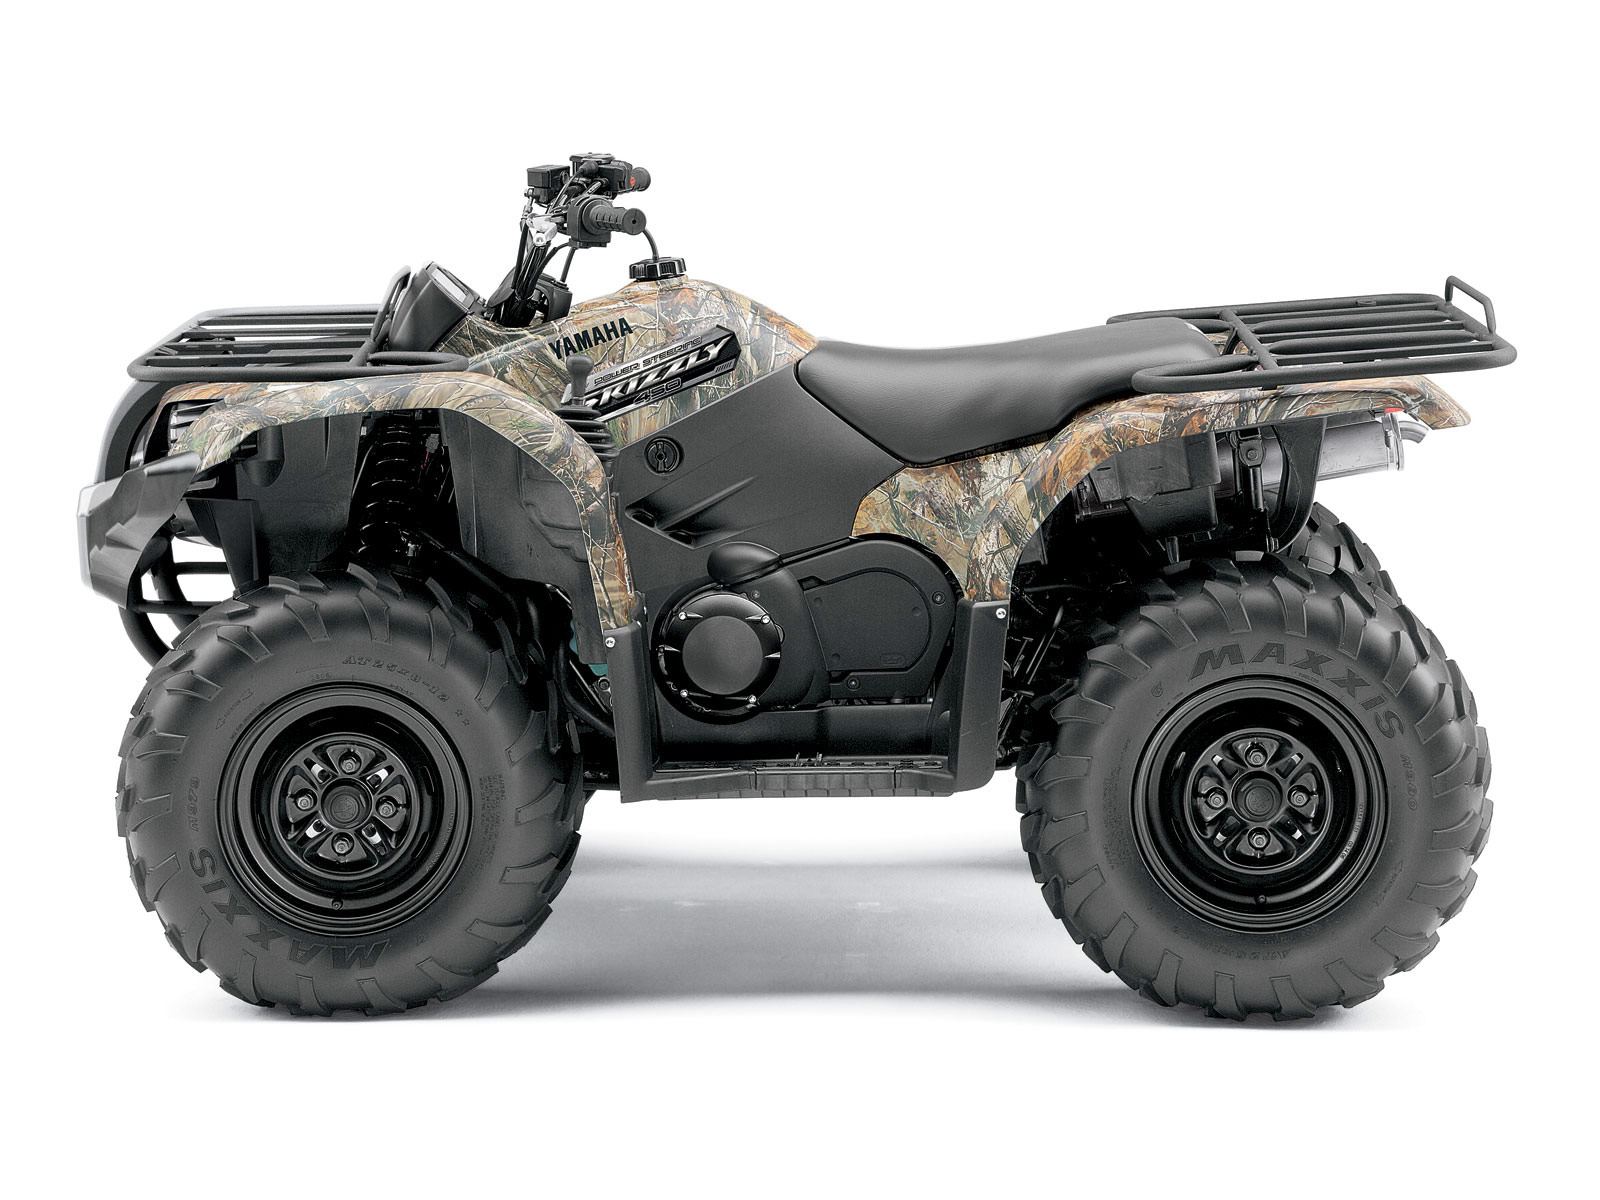 Yamaha Grizzly 450 Grizzly 450 photo - 4